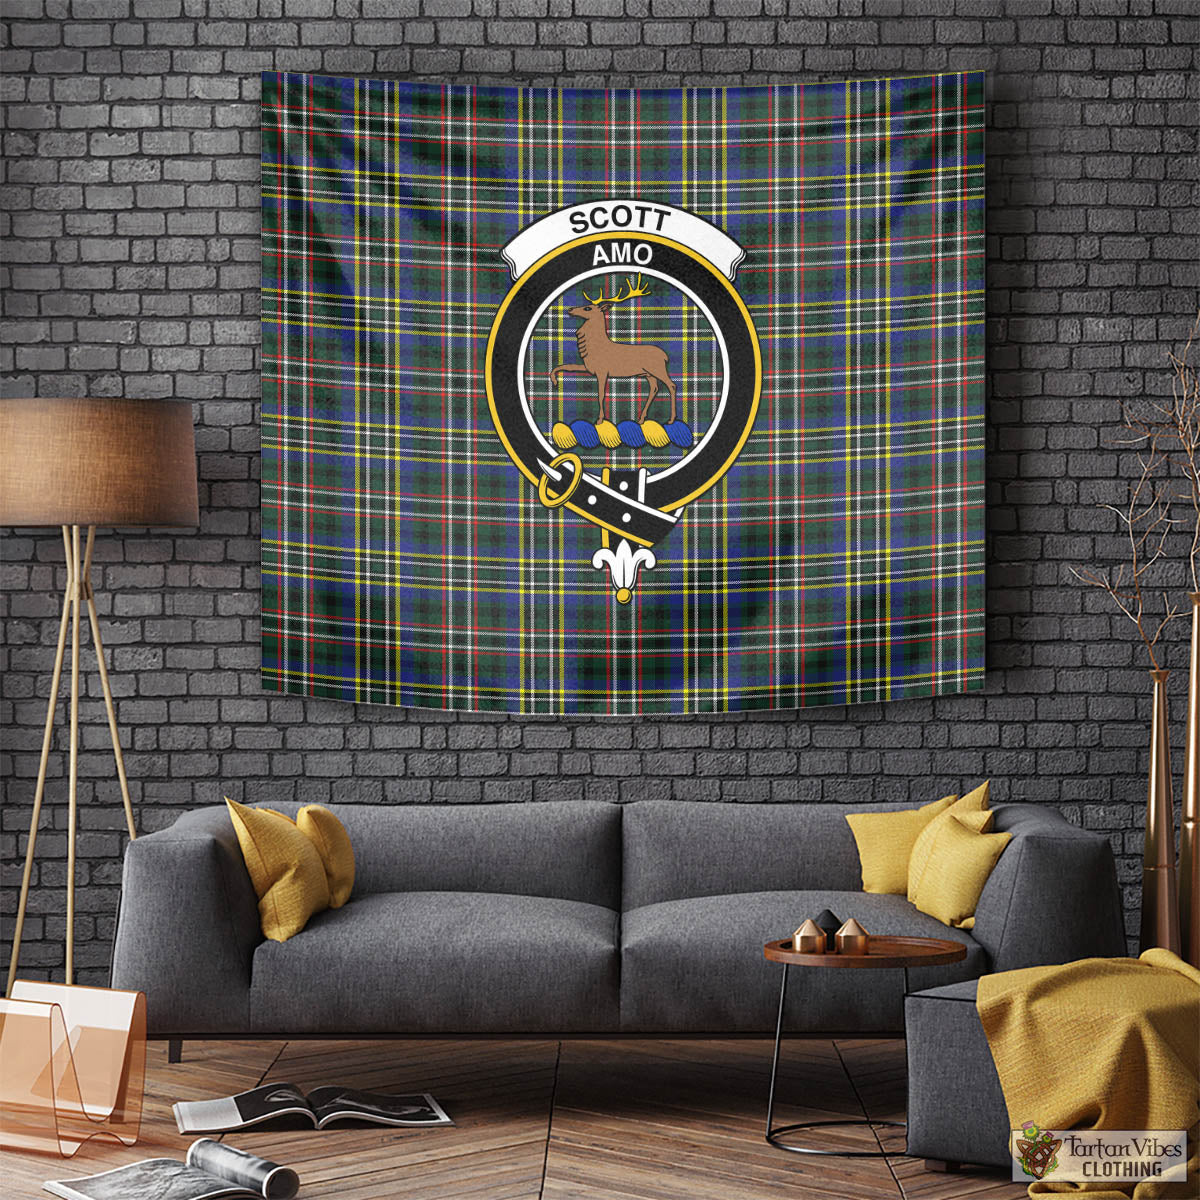 Tartan Vibes Clothing Scott Green Modern Tartan Tapestry Wall Hanging and Home Decor for Room with Family Crest